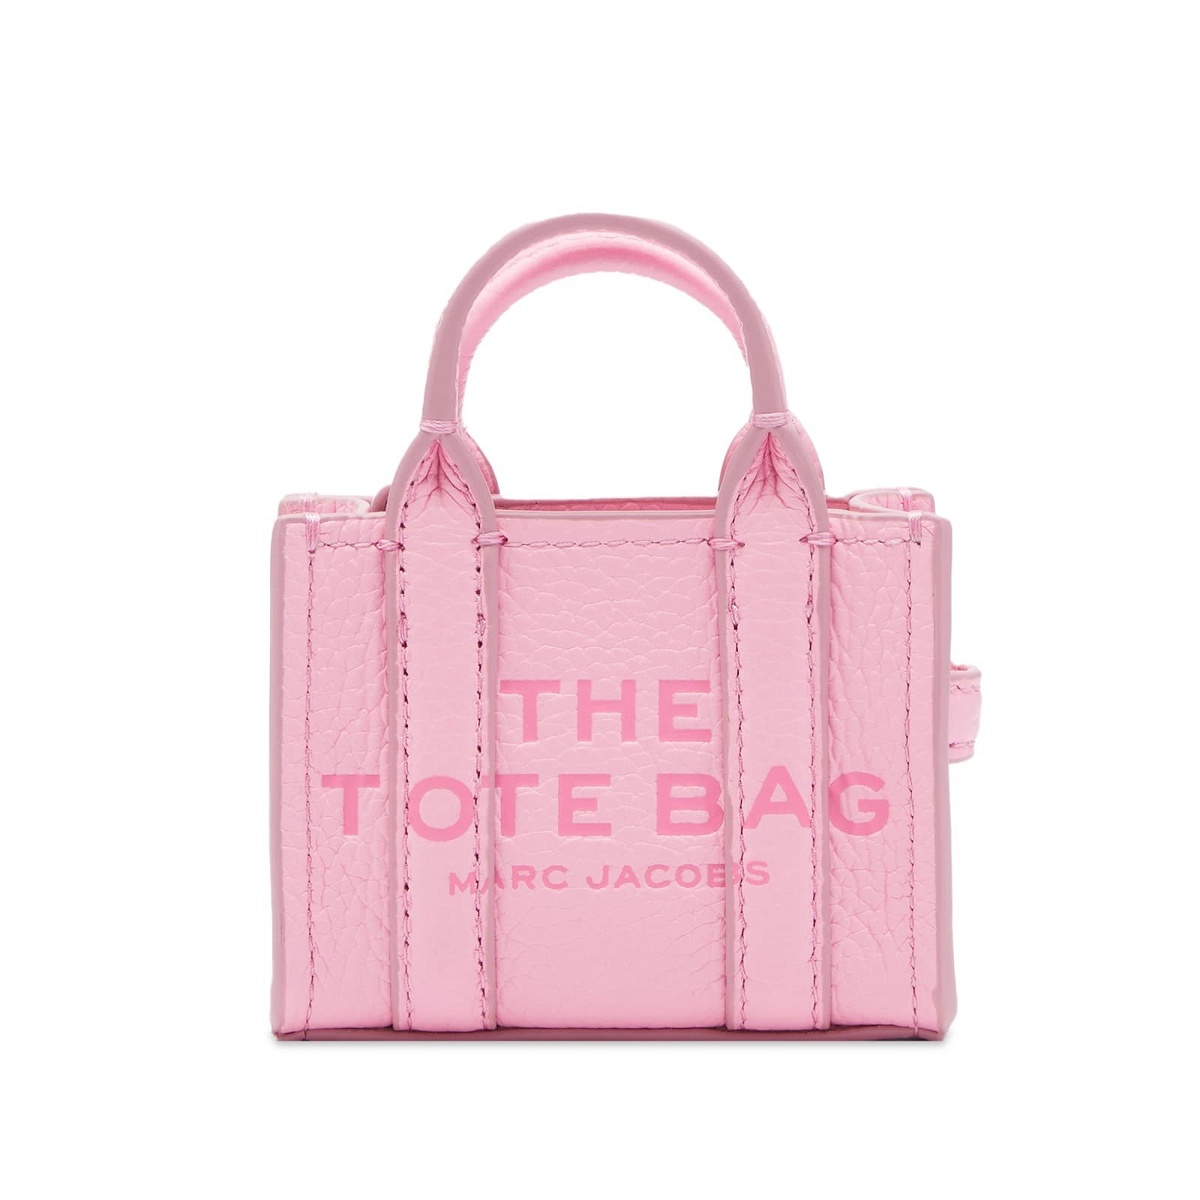 Marc Jacobs Jelly Glitter Snapshot Camera Bag in Pink